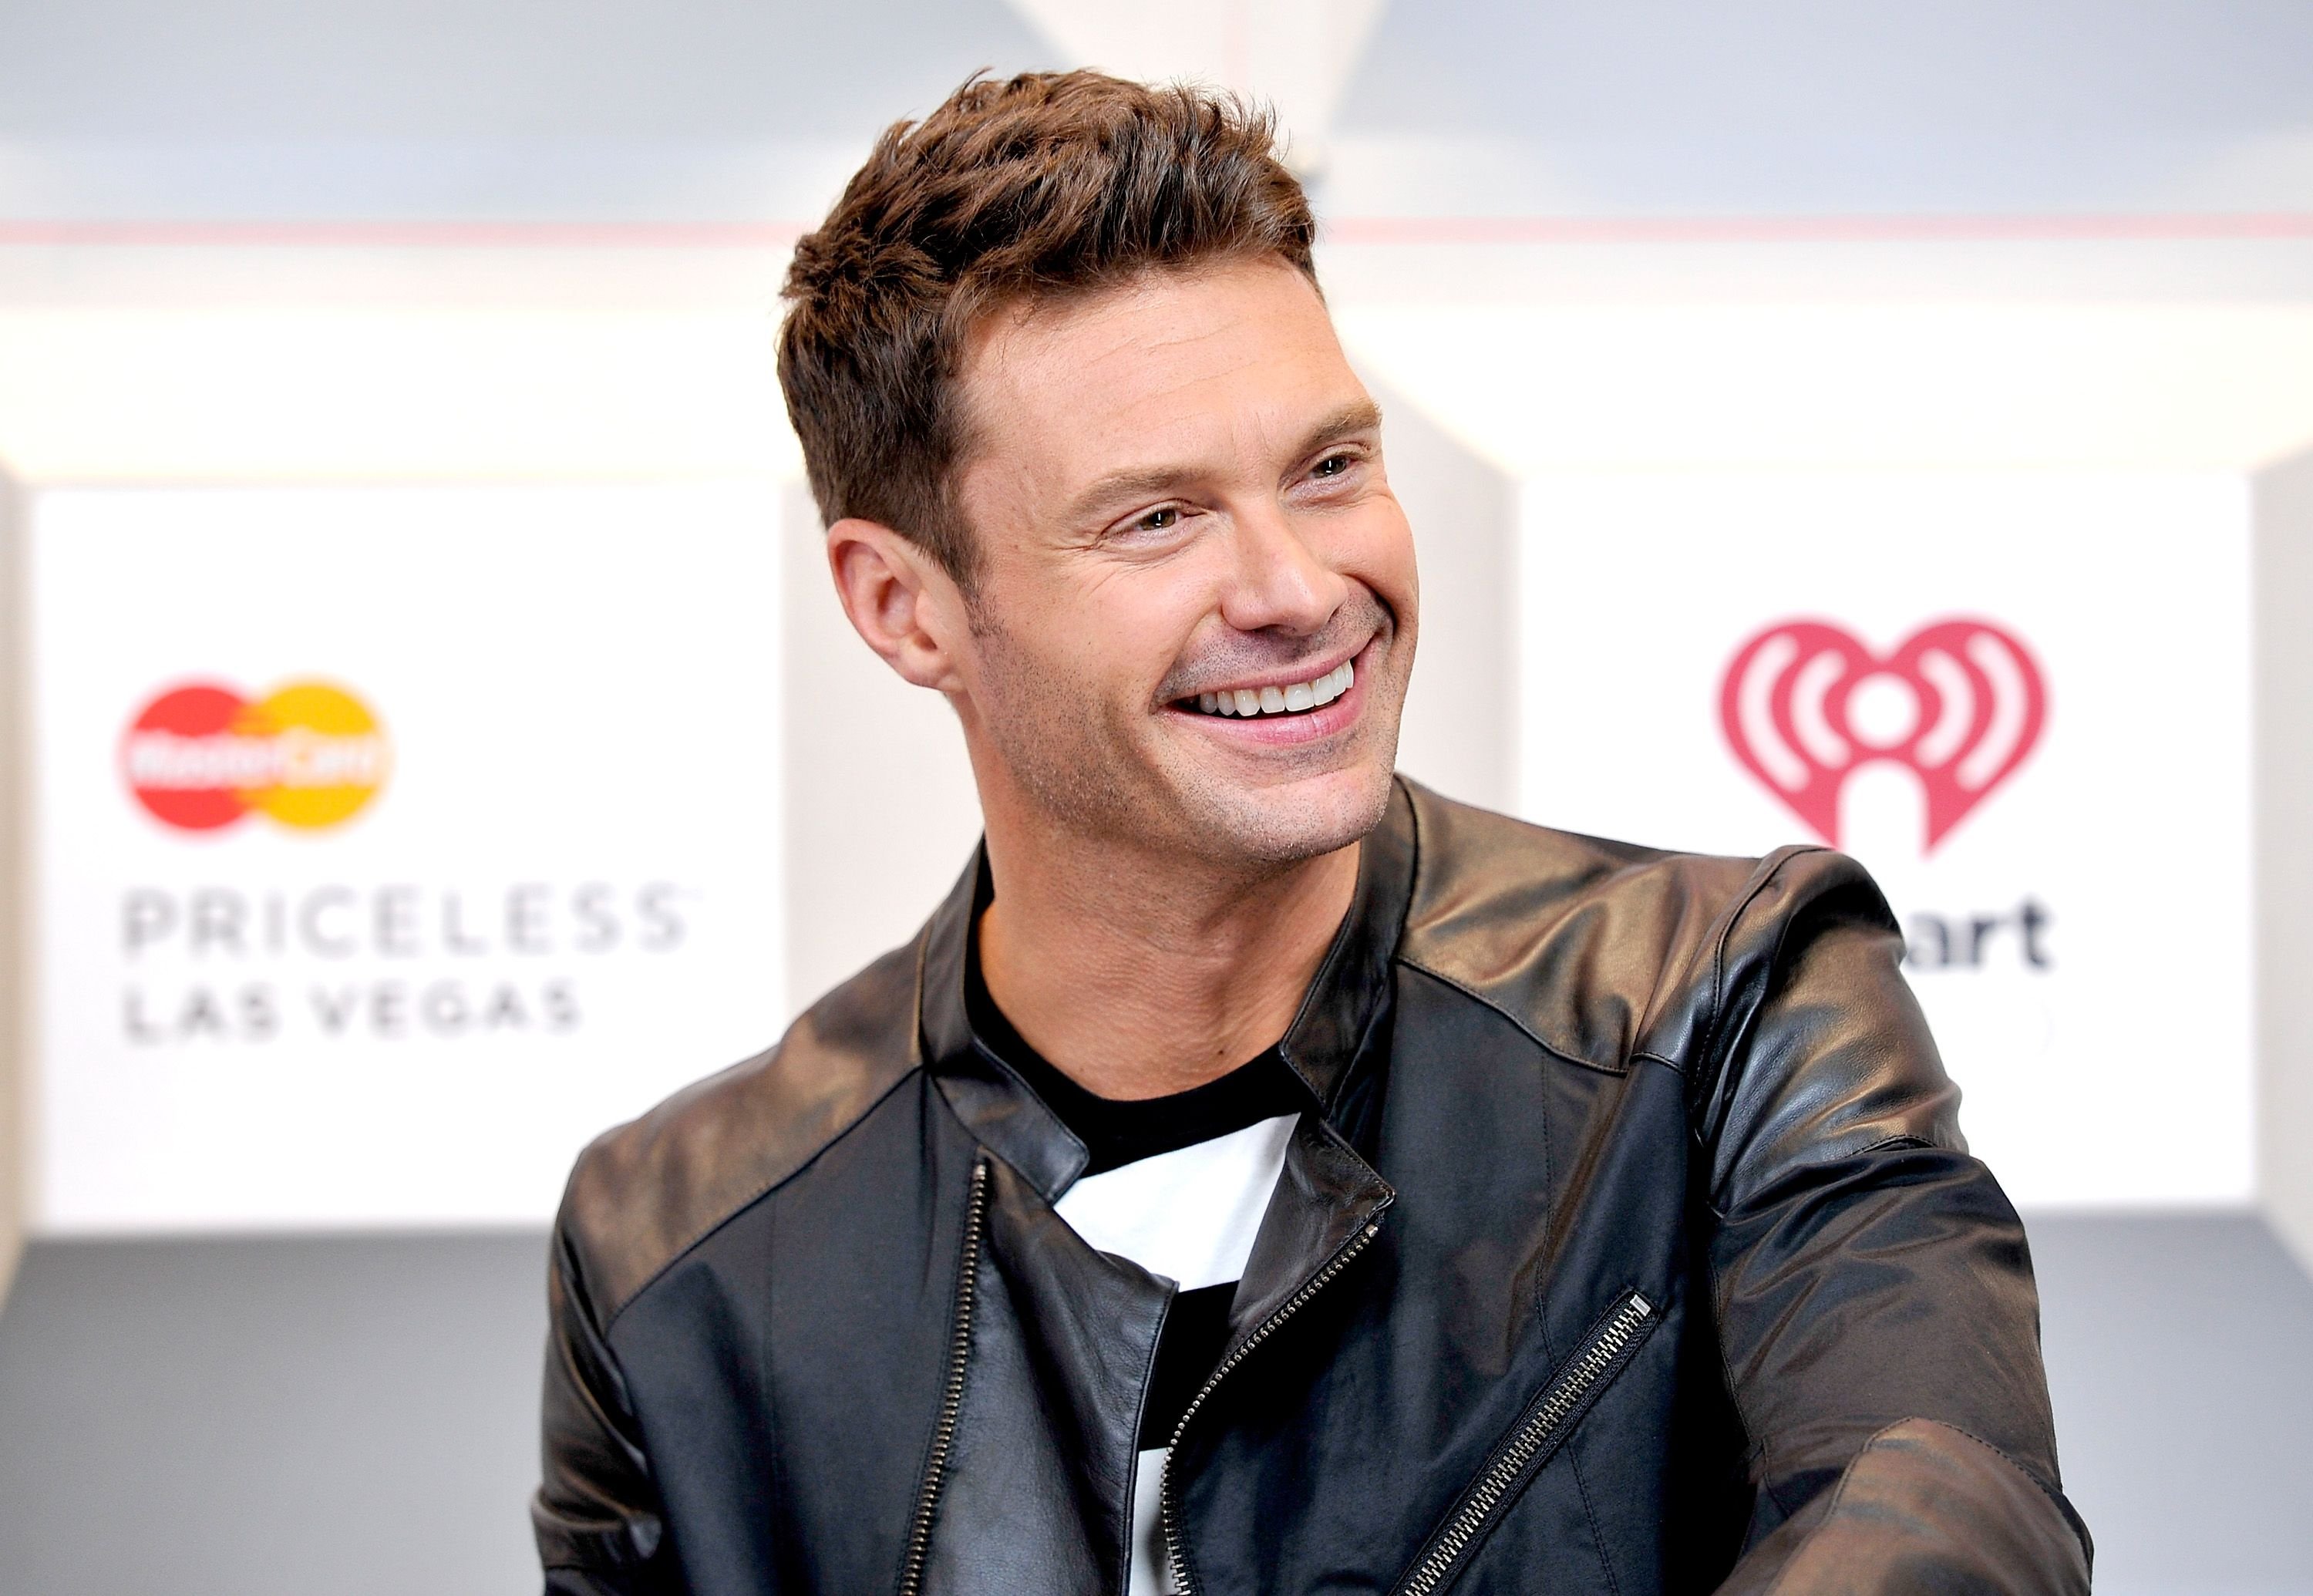 Host Ryan Seacrest at the 2014 iHeartRadio Music Festival at the MGM Grand Garden Arena on September 19, 2014. | Photo: Getty Images